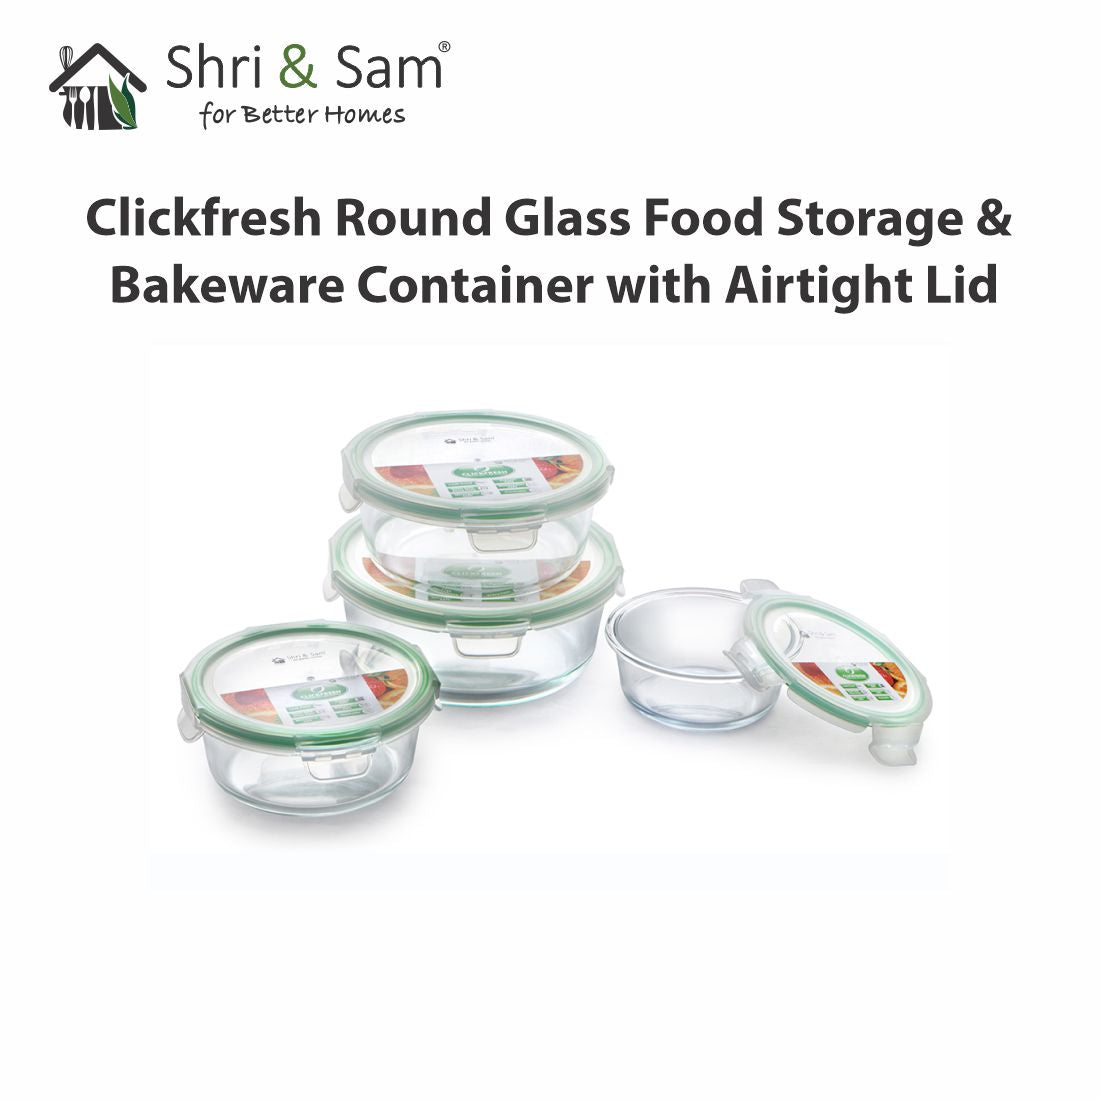 Glass 400ml, 650ml, 950ml & 1300ml Food Storage & Bakeware Container with Airtight Lid Round Clickfresh